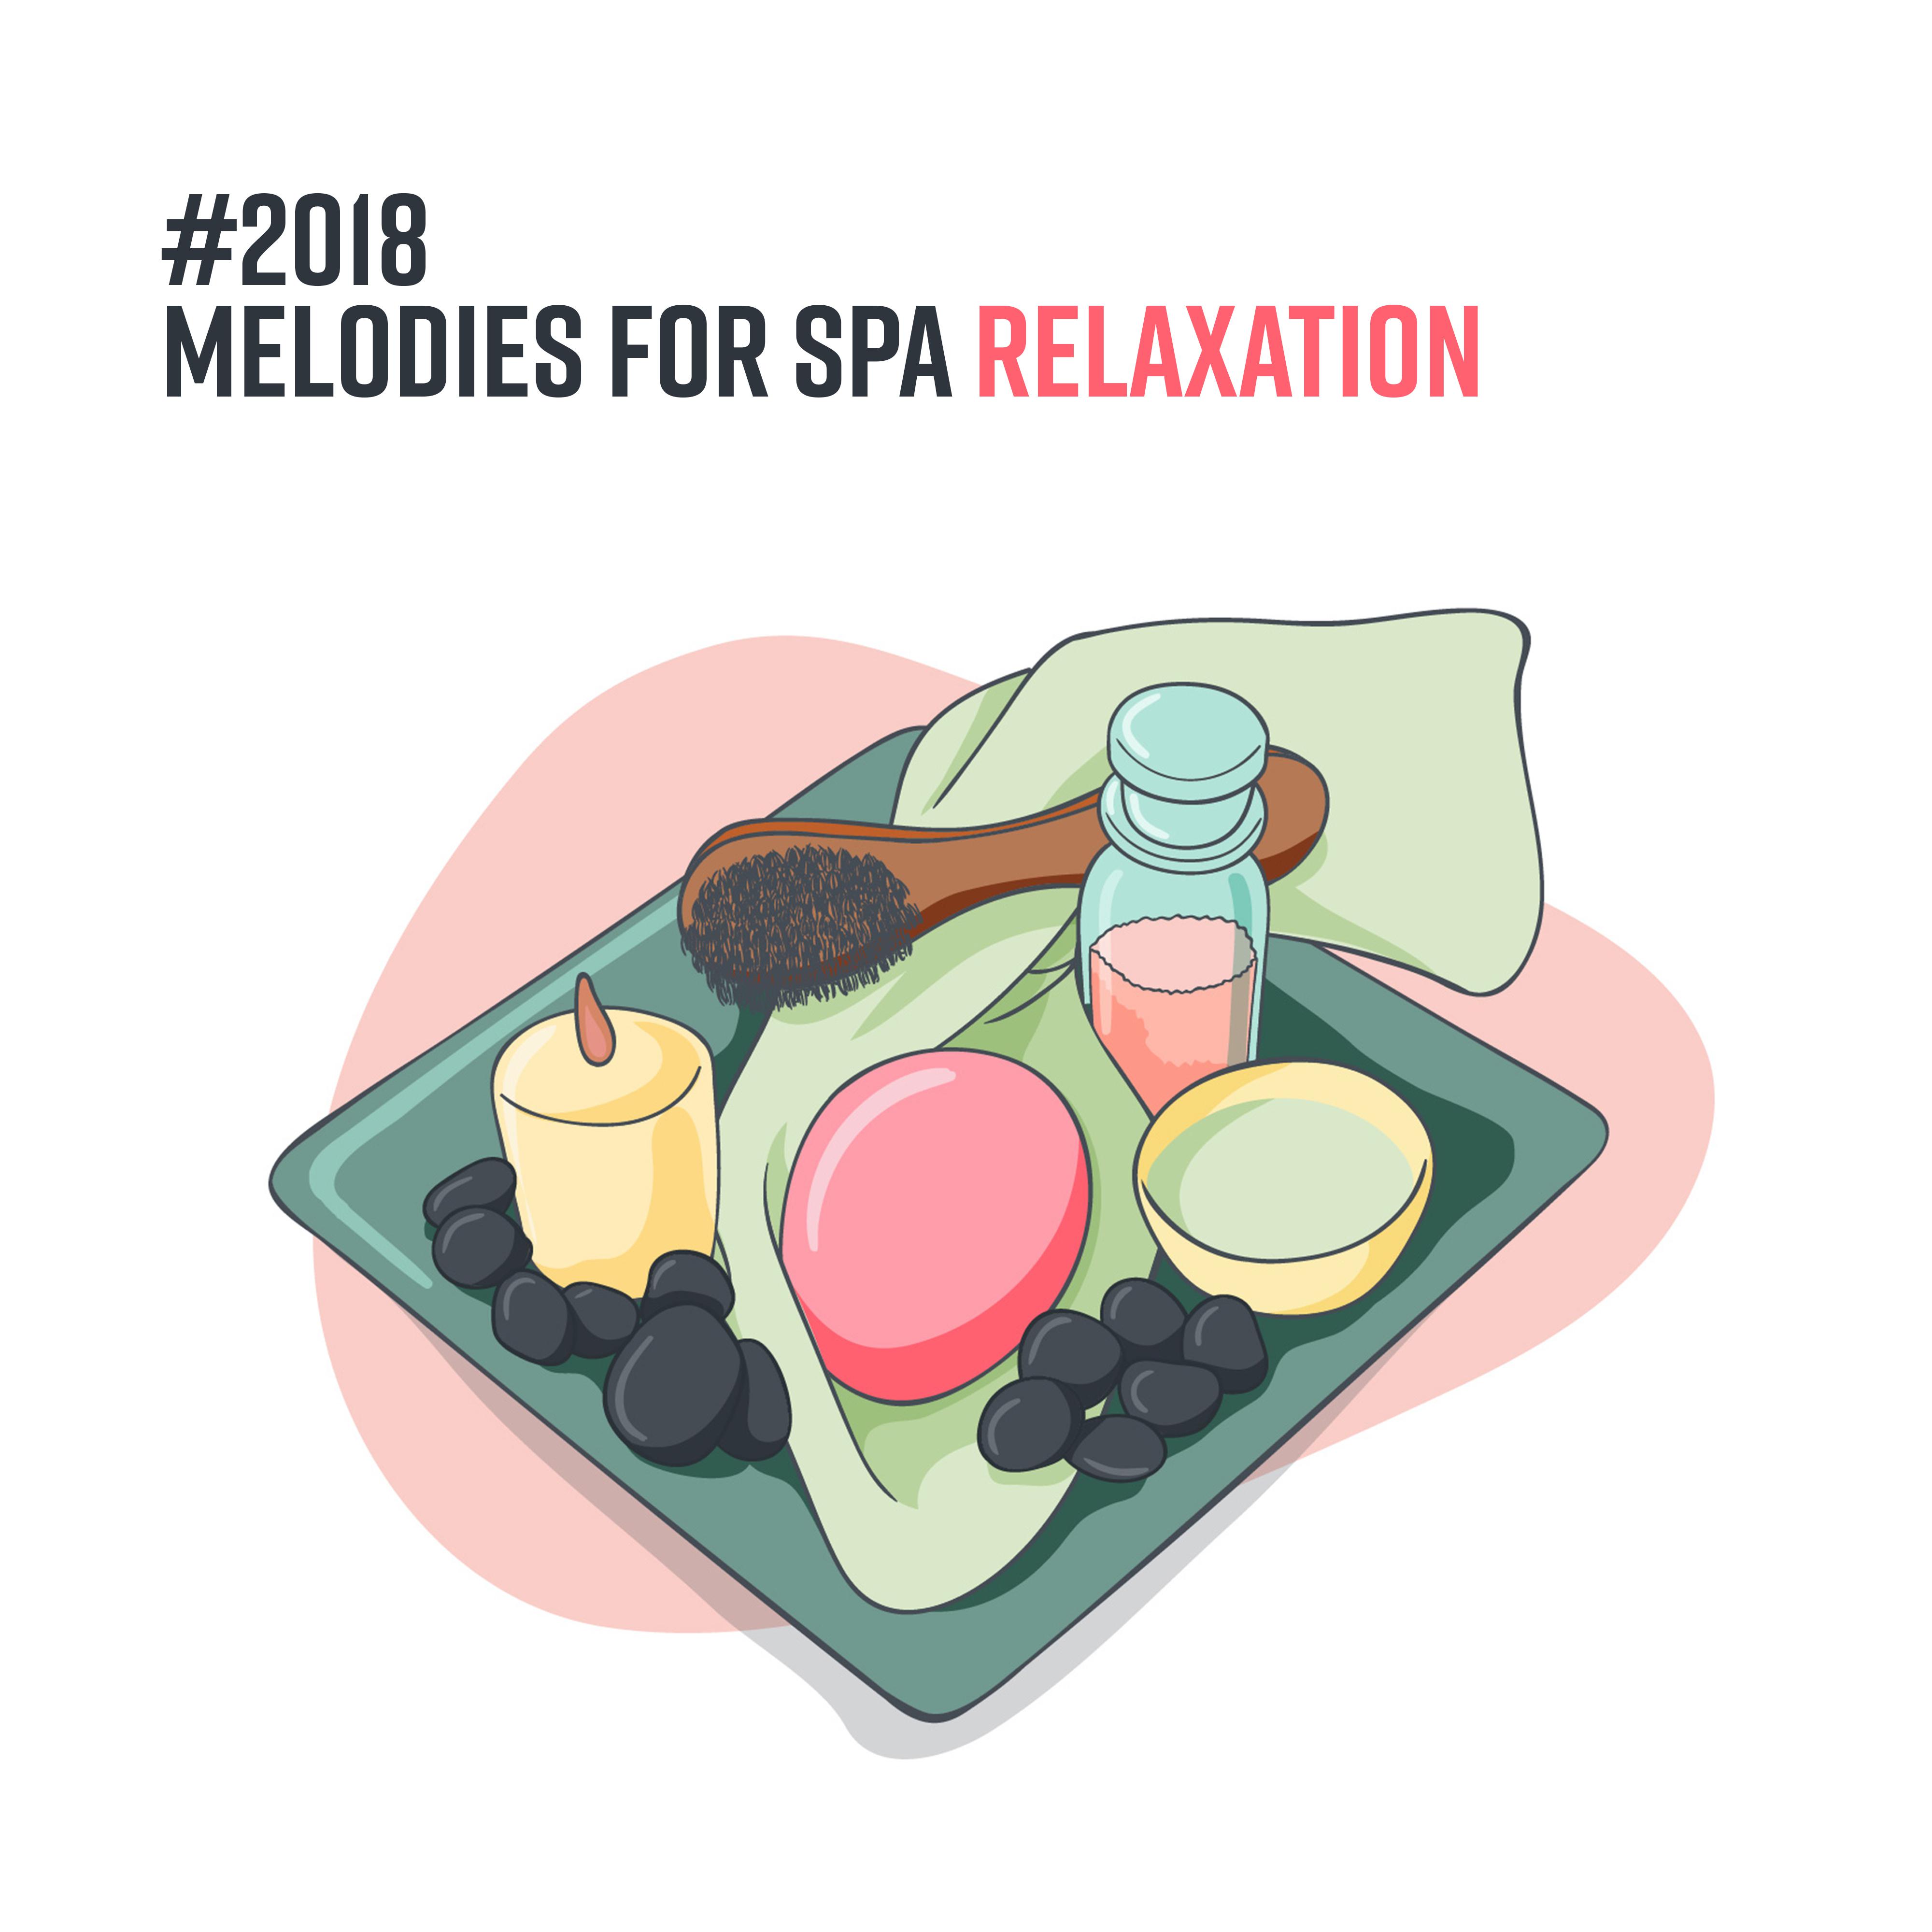 #2018 Melodies for Spa Relaxation